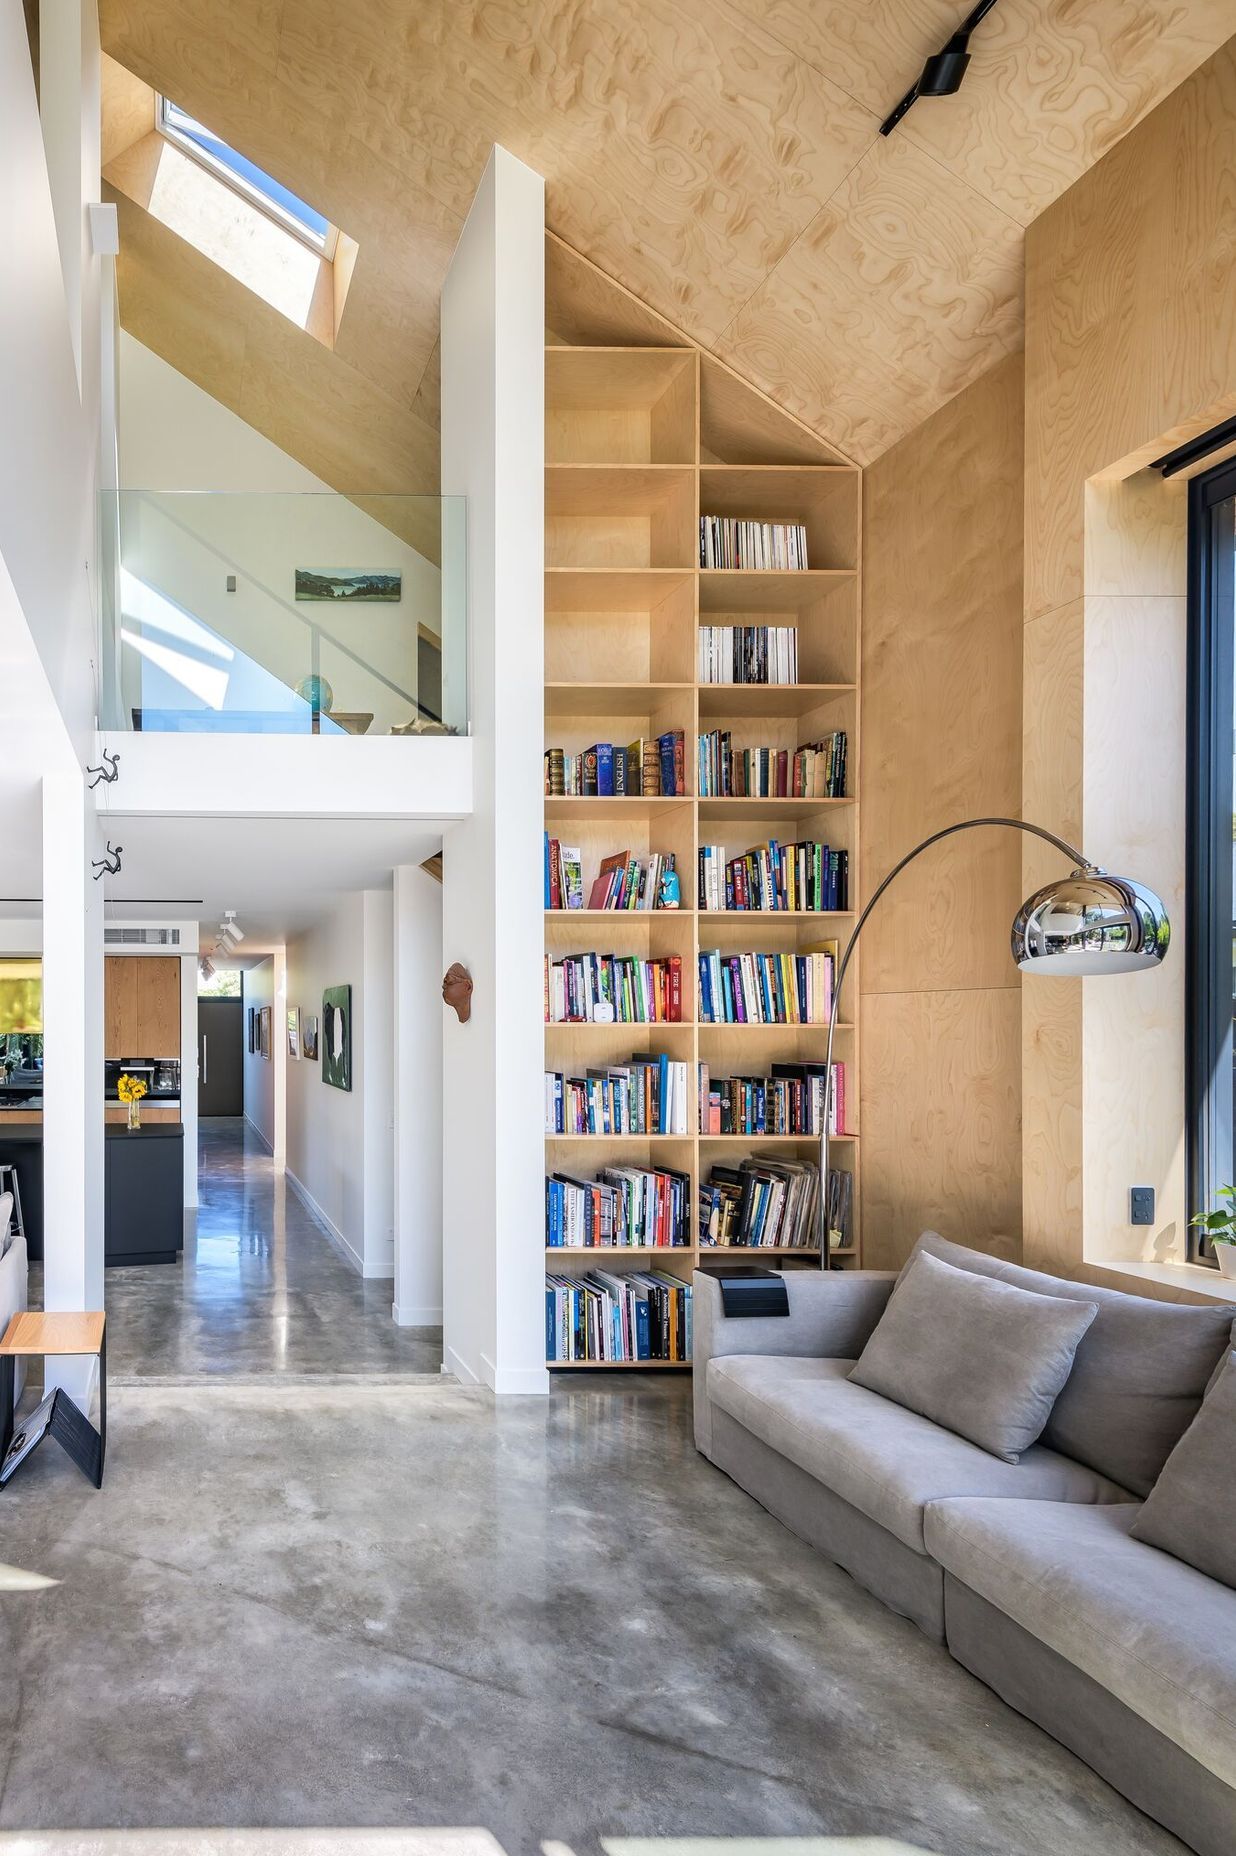 The double-height living space and bookcase leads south past the kitchen to the entry.